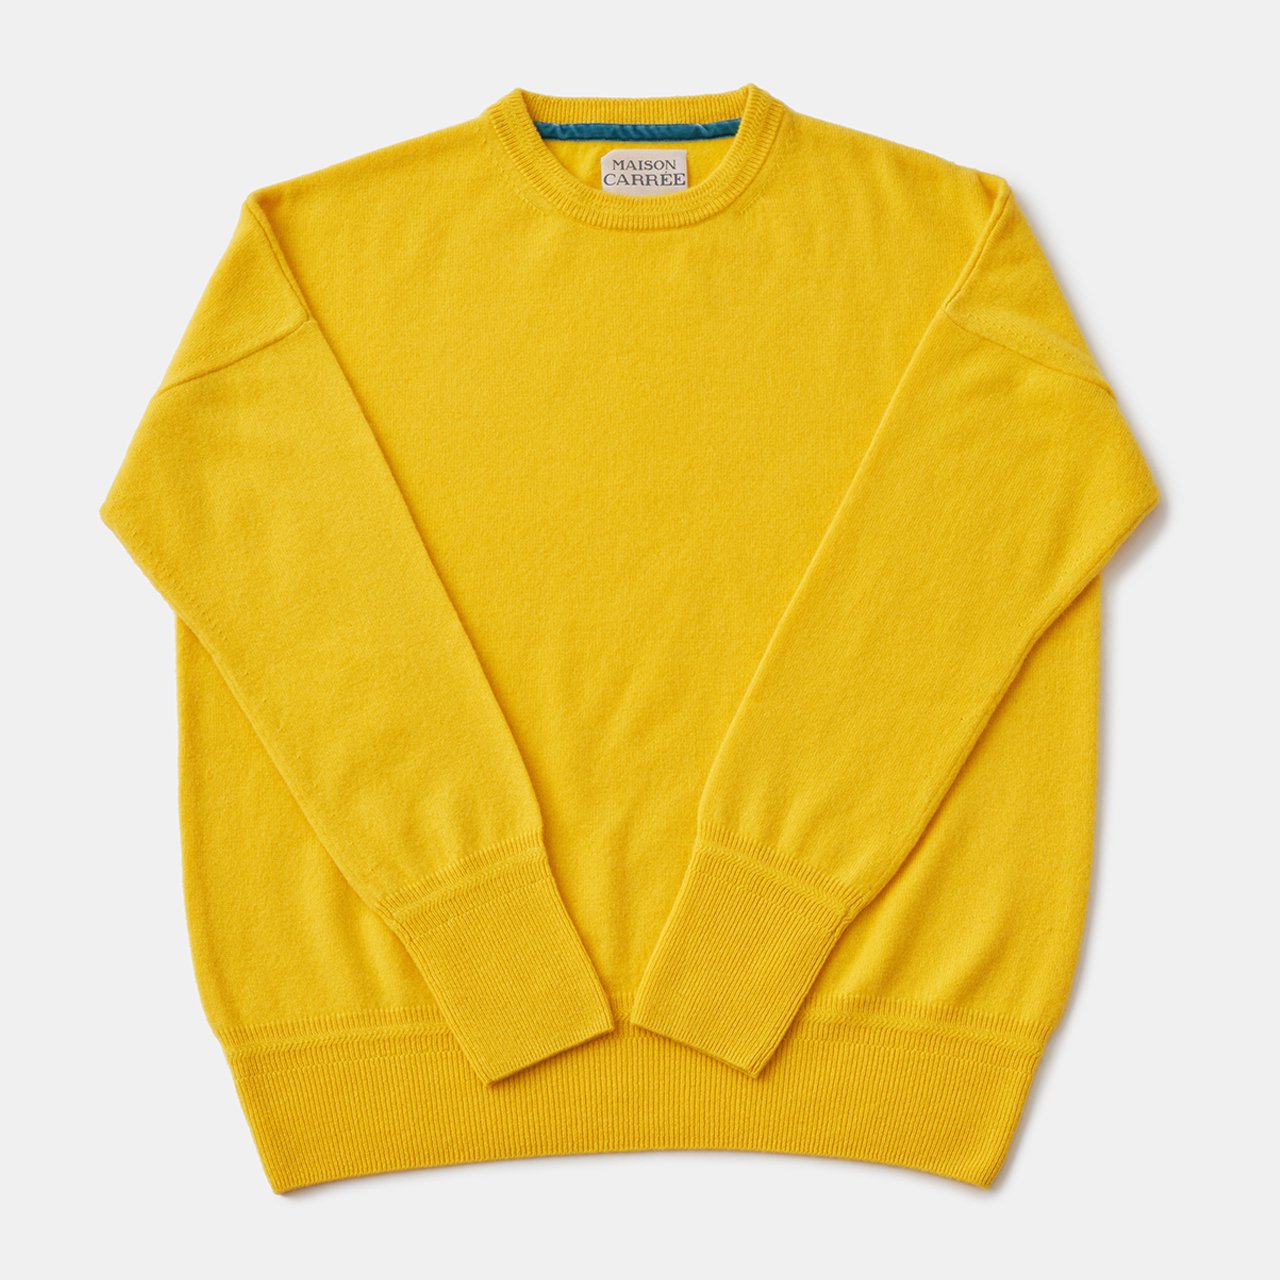 CASHMERE Basic Tops<BR>YELLOW